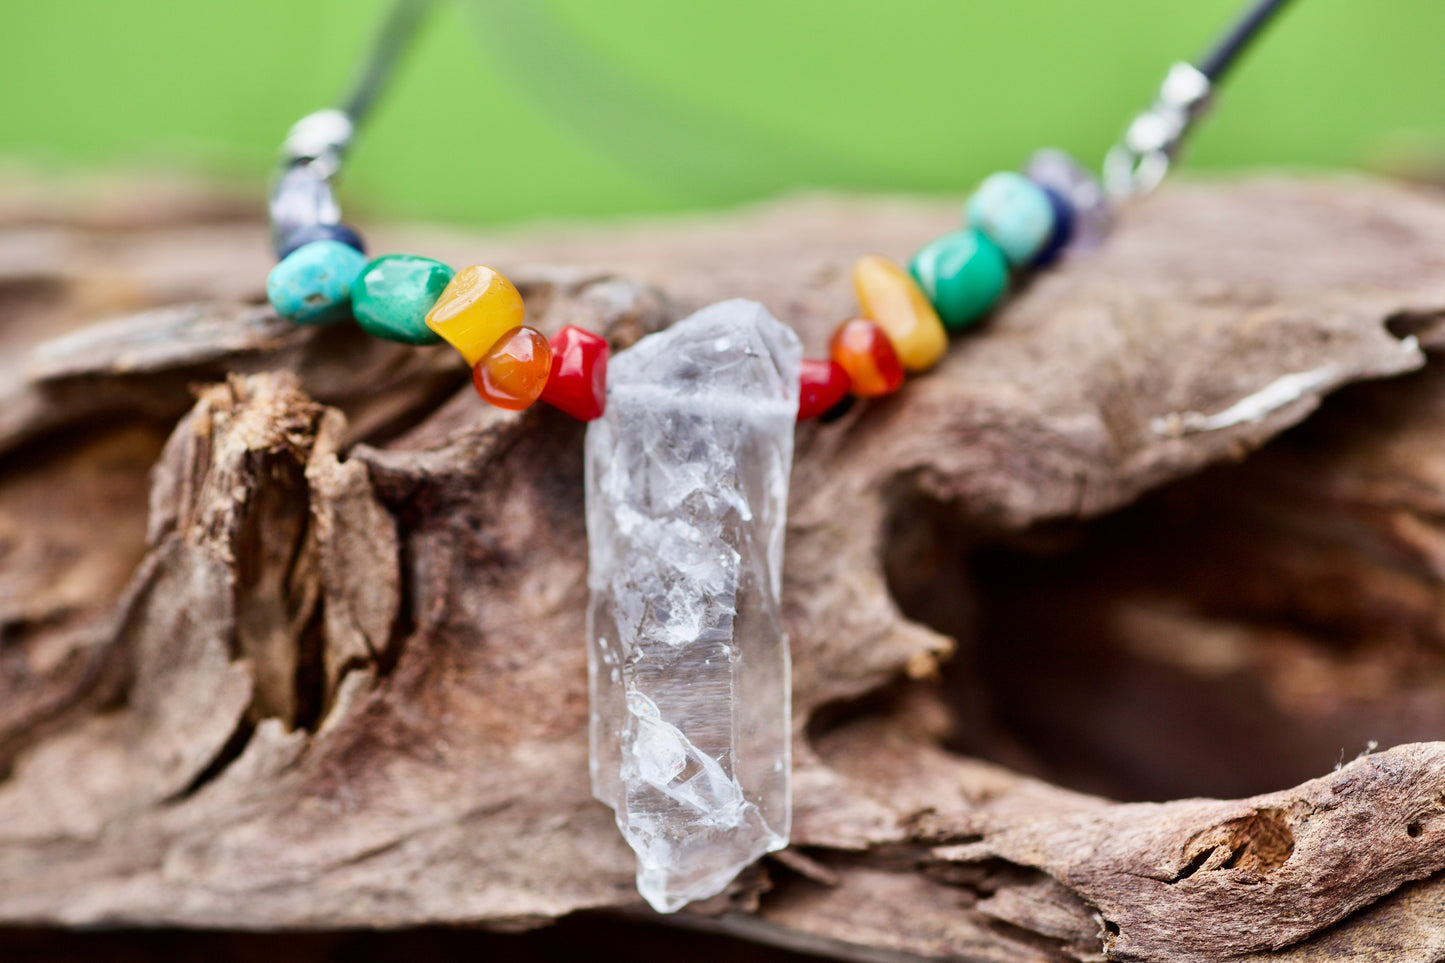 Rainbow / Pride / Chakra Stones and Clear Quartz Warrior Crystal, Sterling Silver, and Leather Necklace